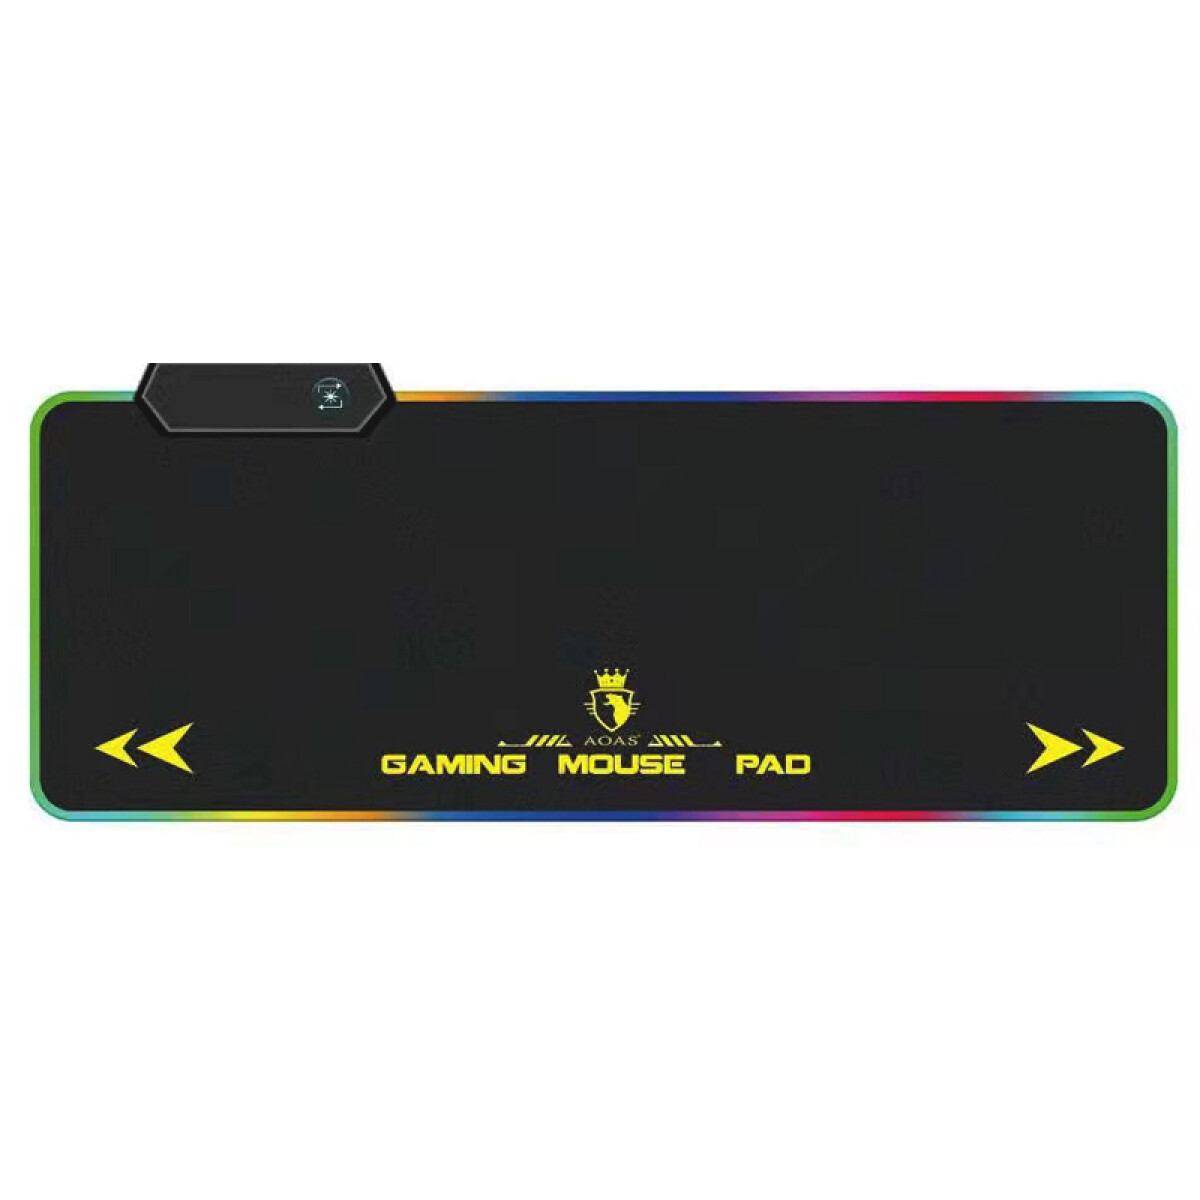 Mouse Pad Gamer RGB S4000 - Unica 